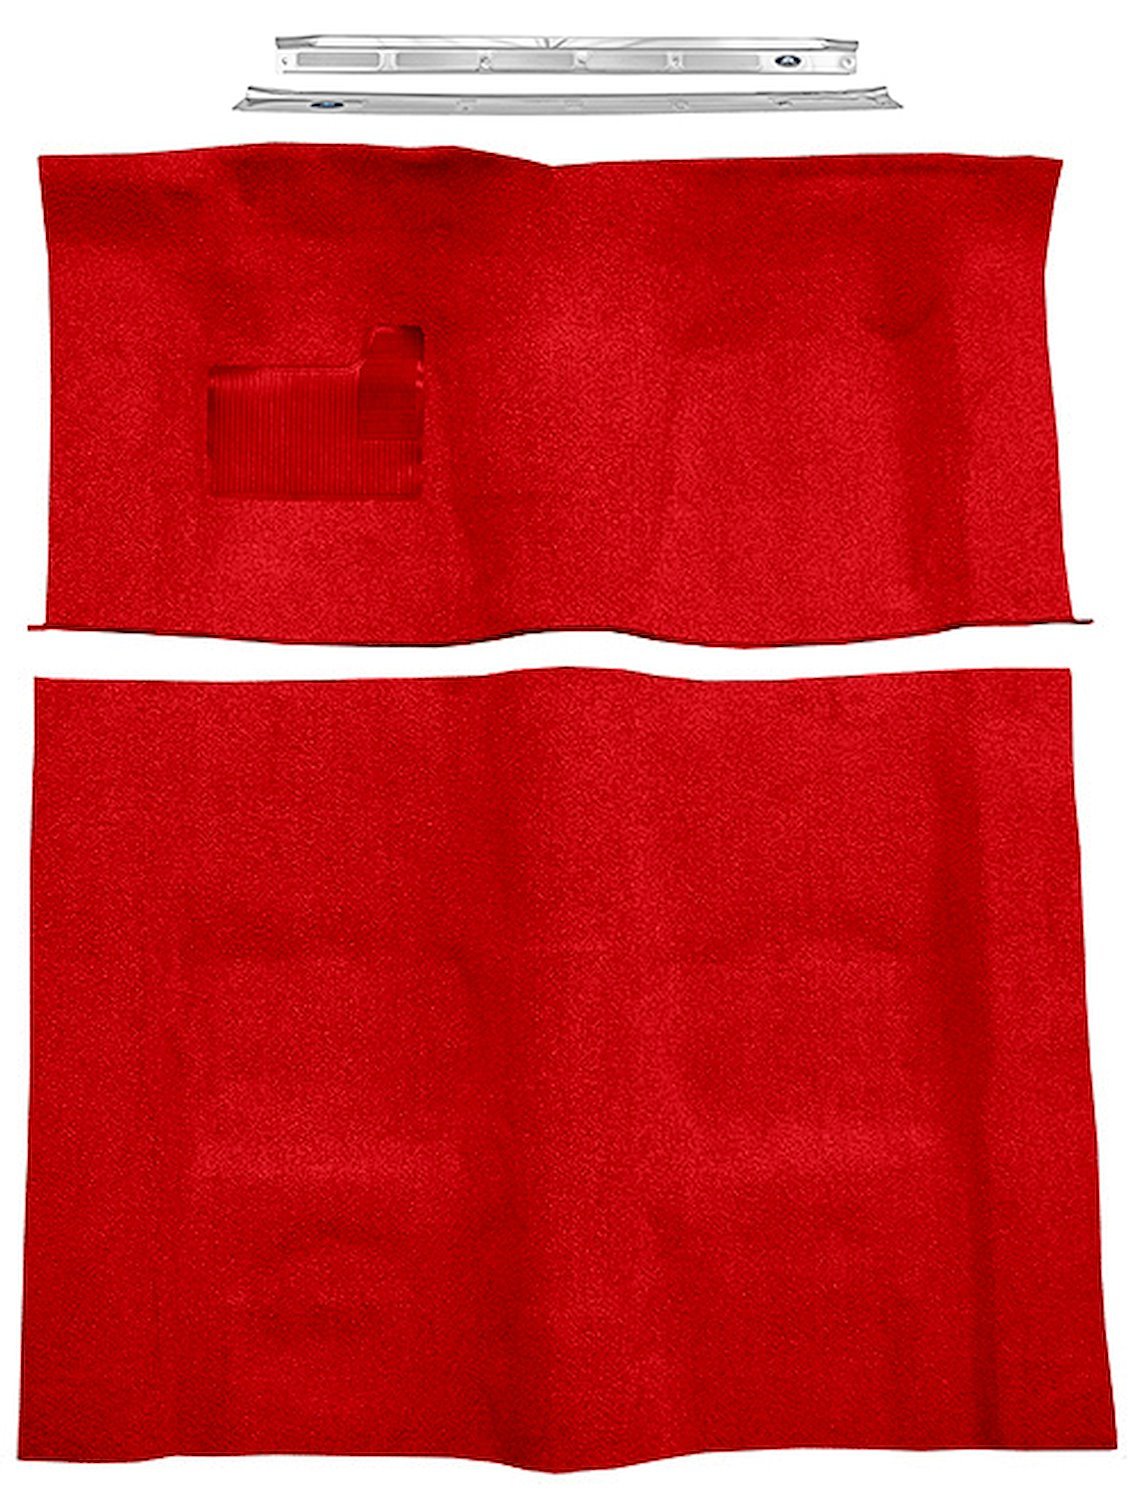 Flame Red Molded-Cut-Pile Carpet Kit for 1974-1975 Chevrolet Camaro, Pontiac Firebird w/Automatic Transmission [Mass Backing]